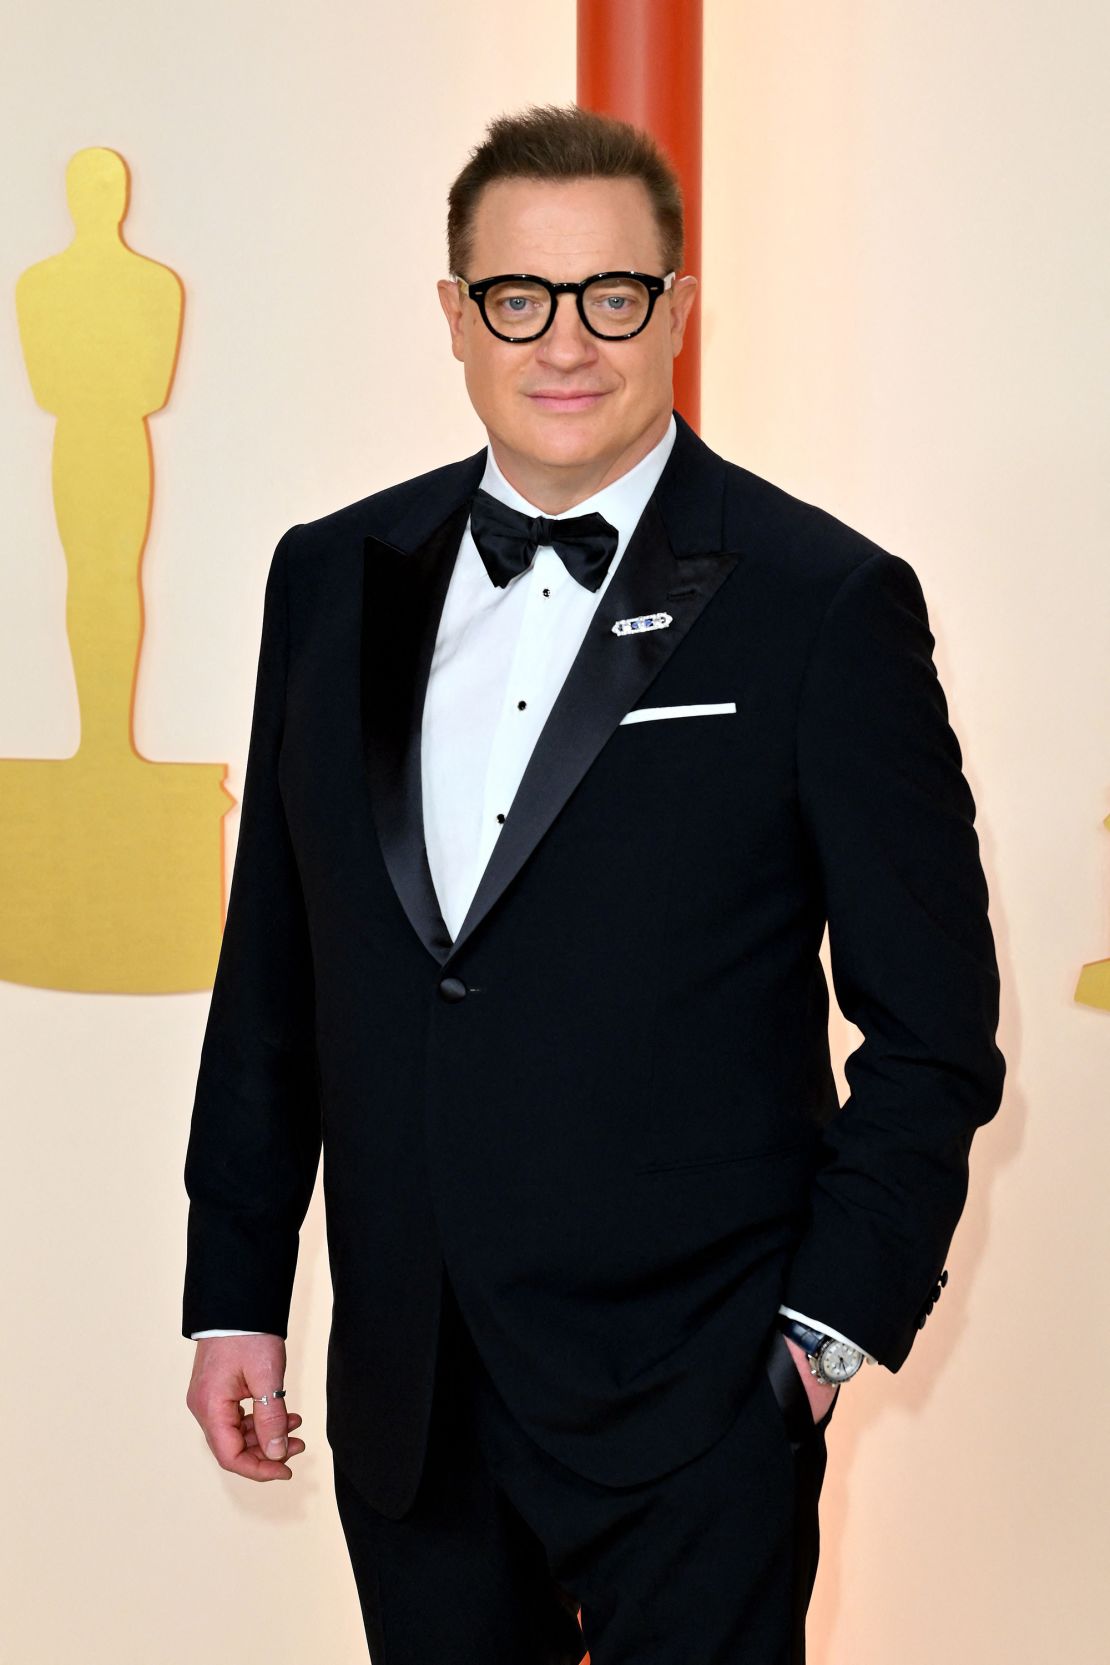 Brendan Fraser, Best Leading Actor nominee for his role in "The Whale," wore a Giorgio Armani suit topped off with a bow tie and paired with an Omega watch.